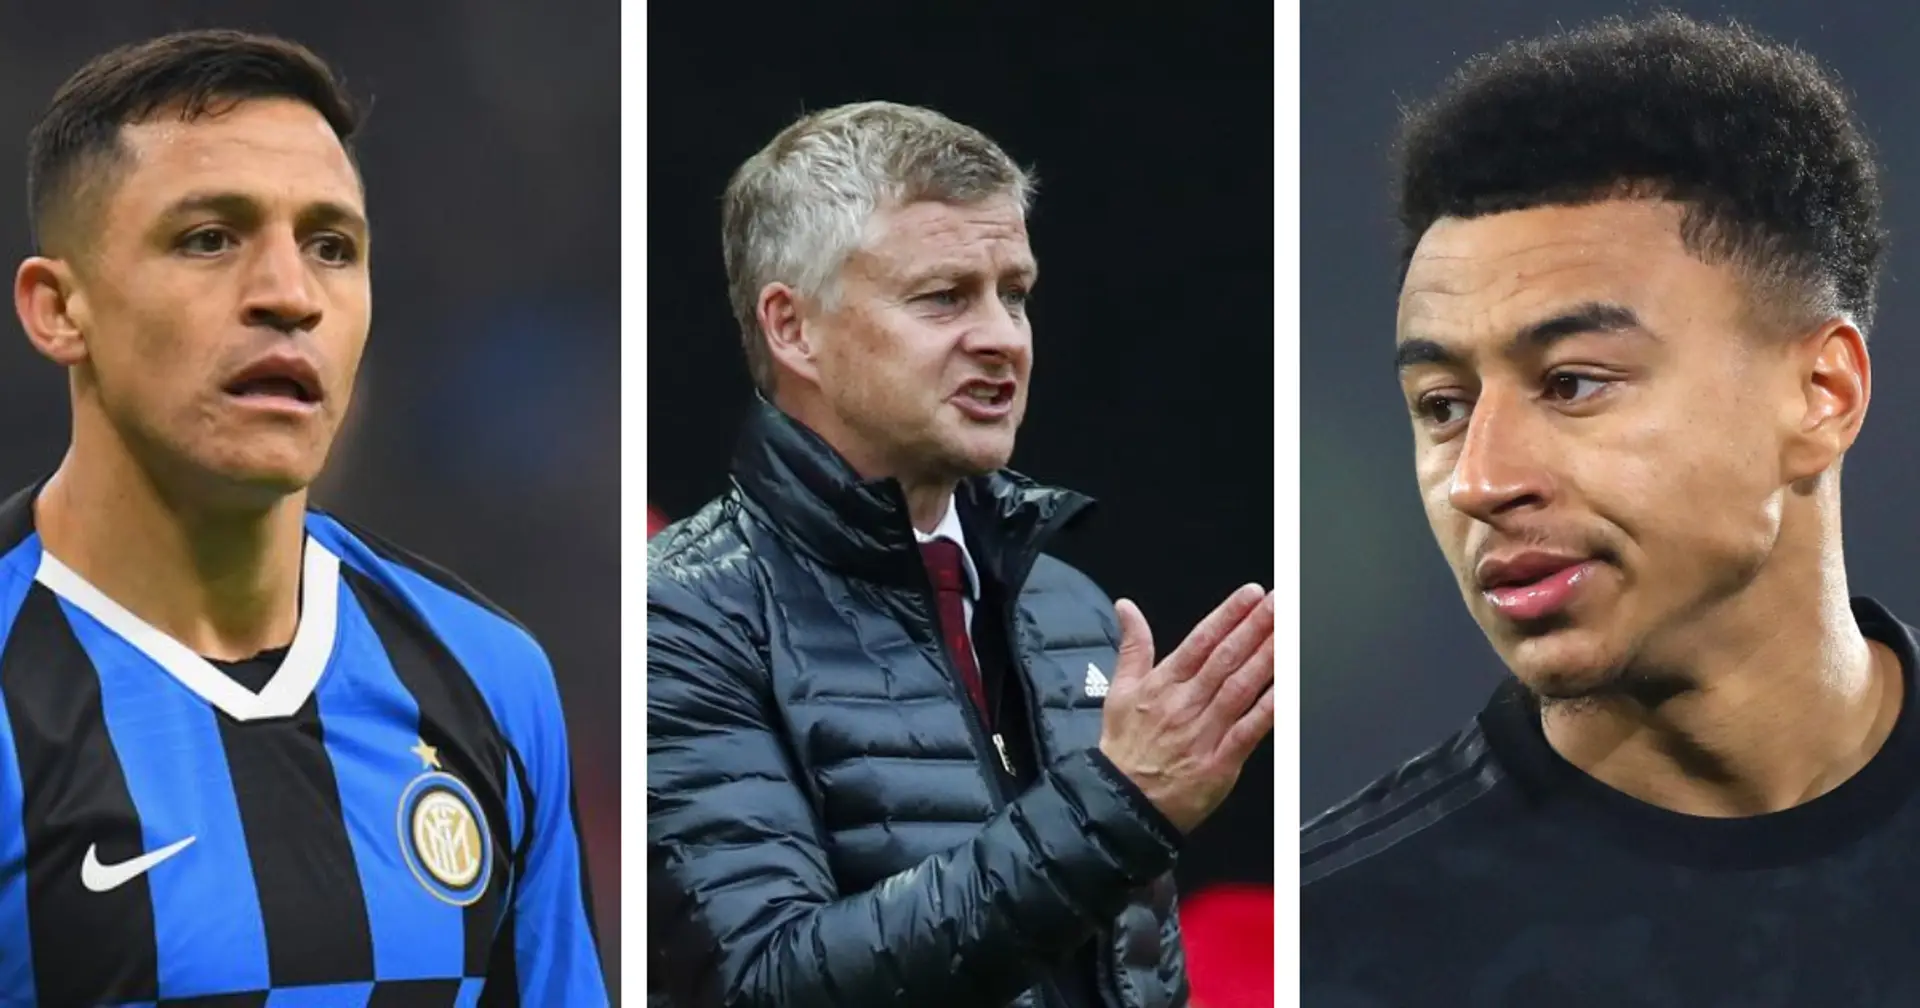 Man United reportedly willing to listen to offers for as many as 6 players - including Lingard and Dalot